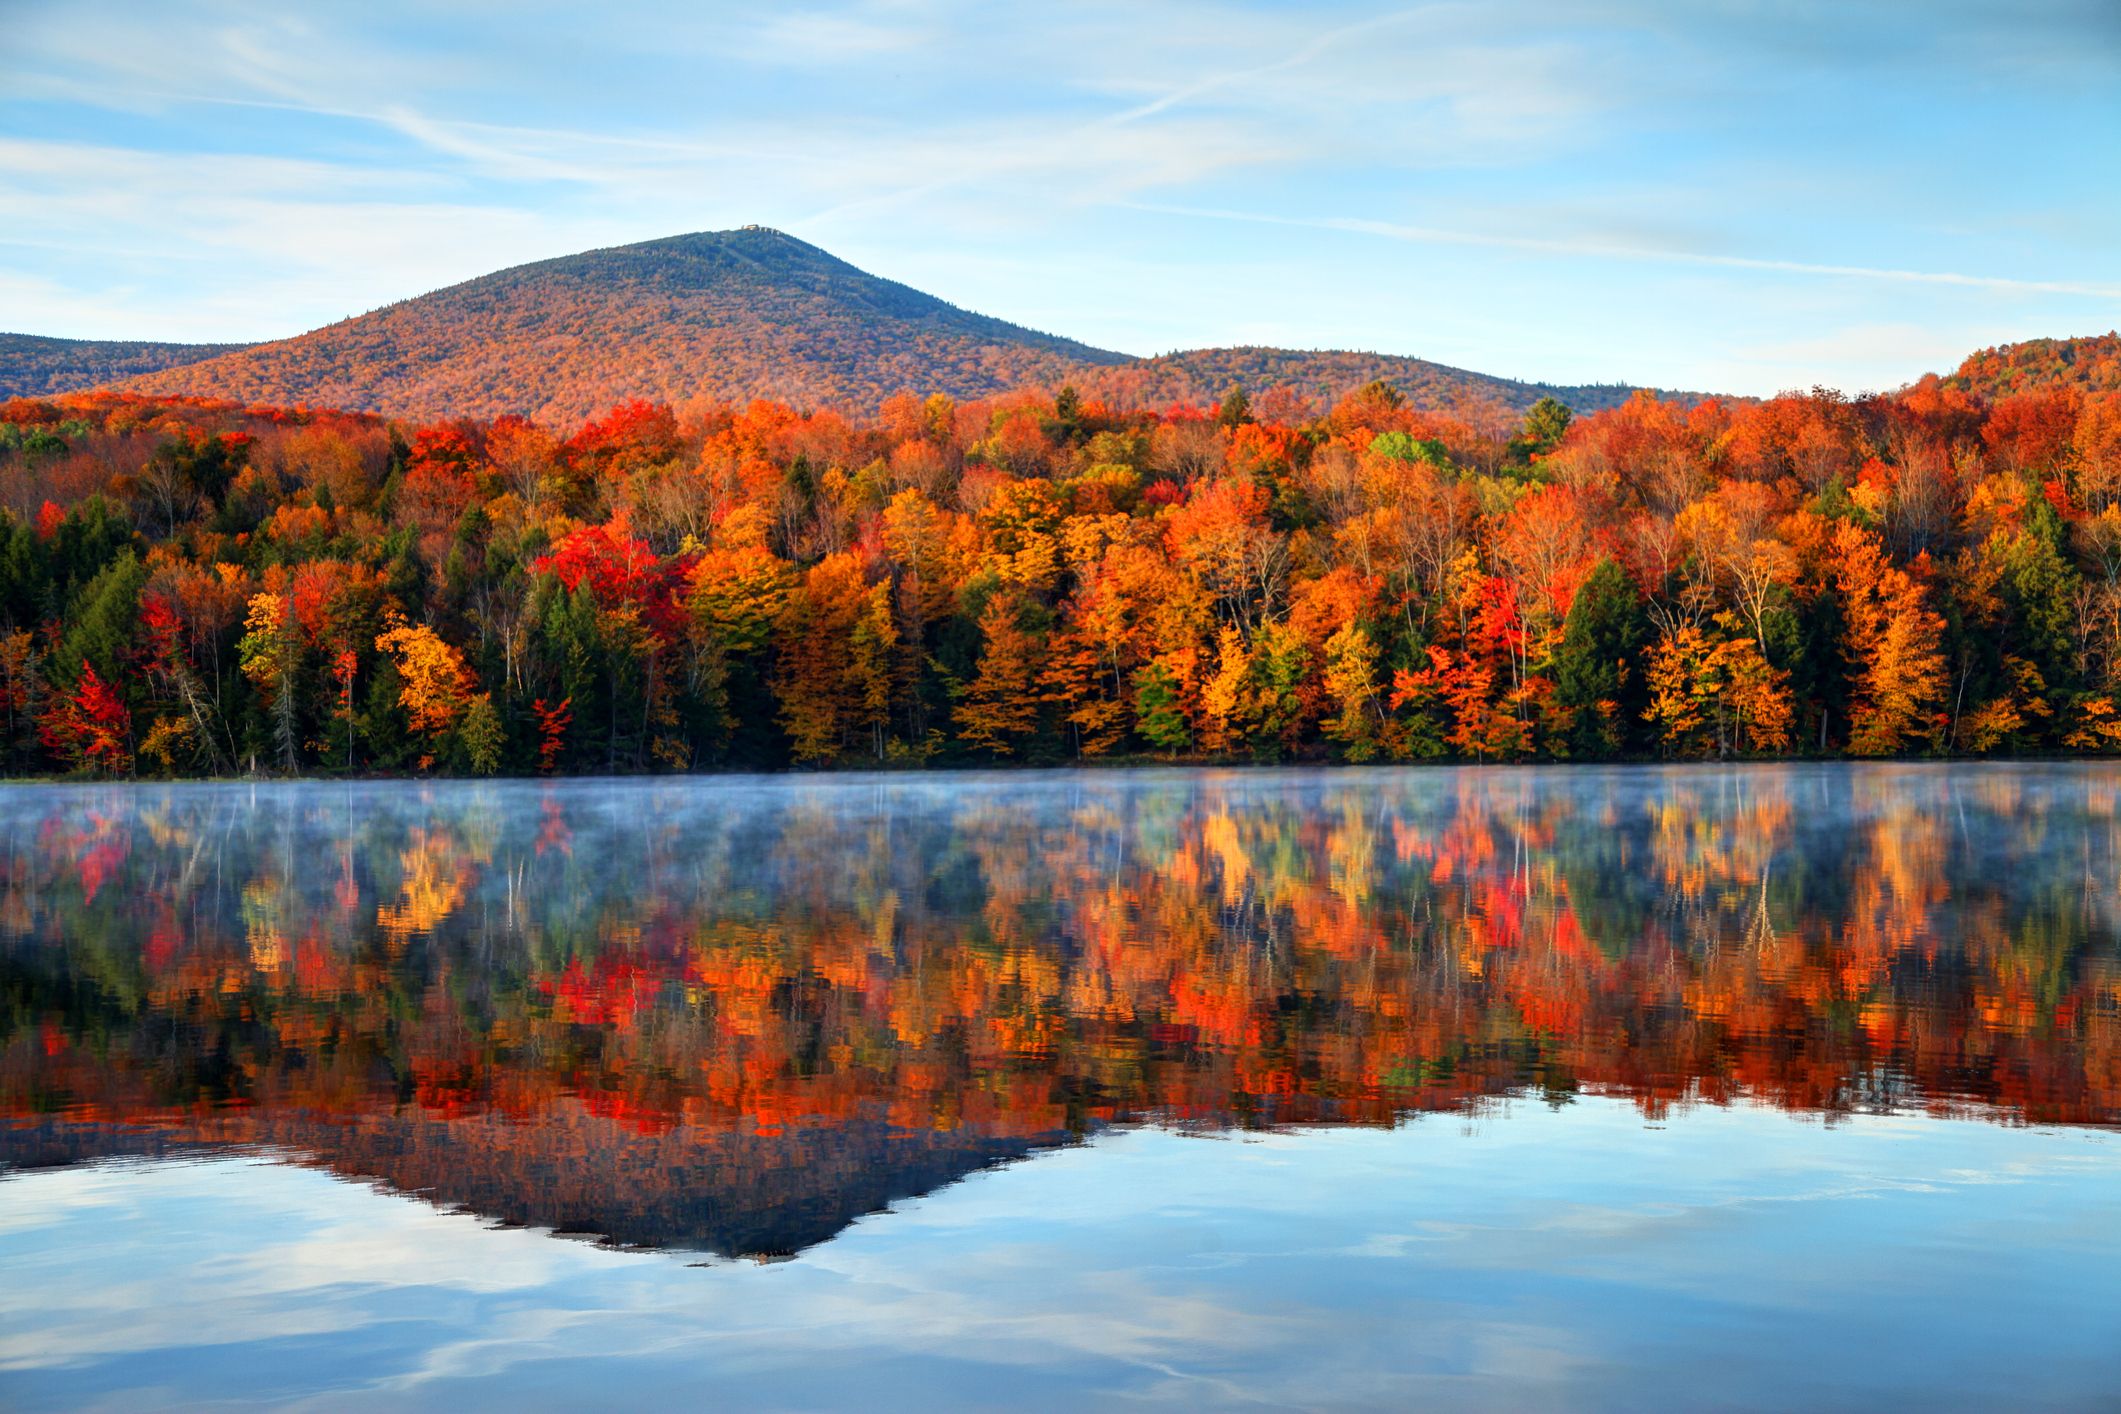 An autumn scene with changing leaves; Getty Images